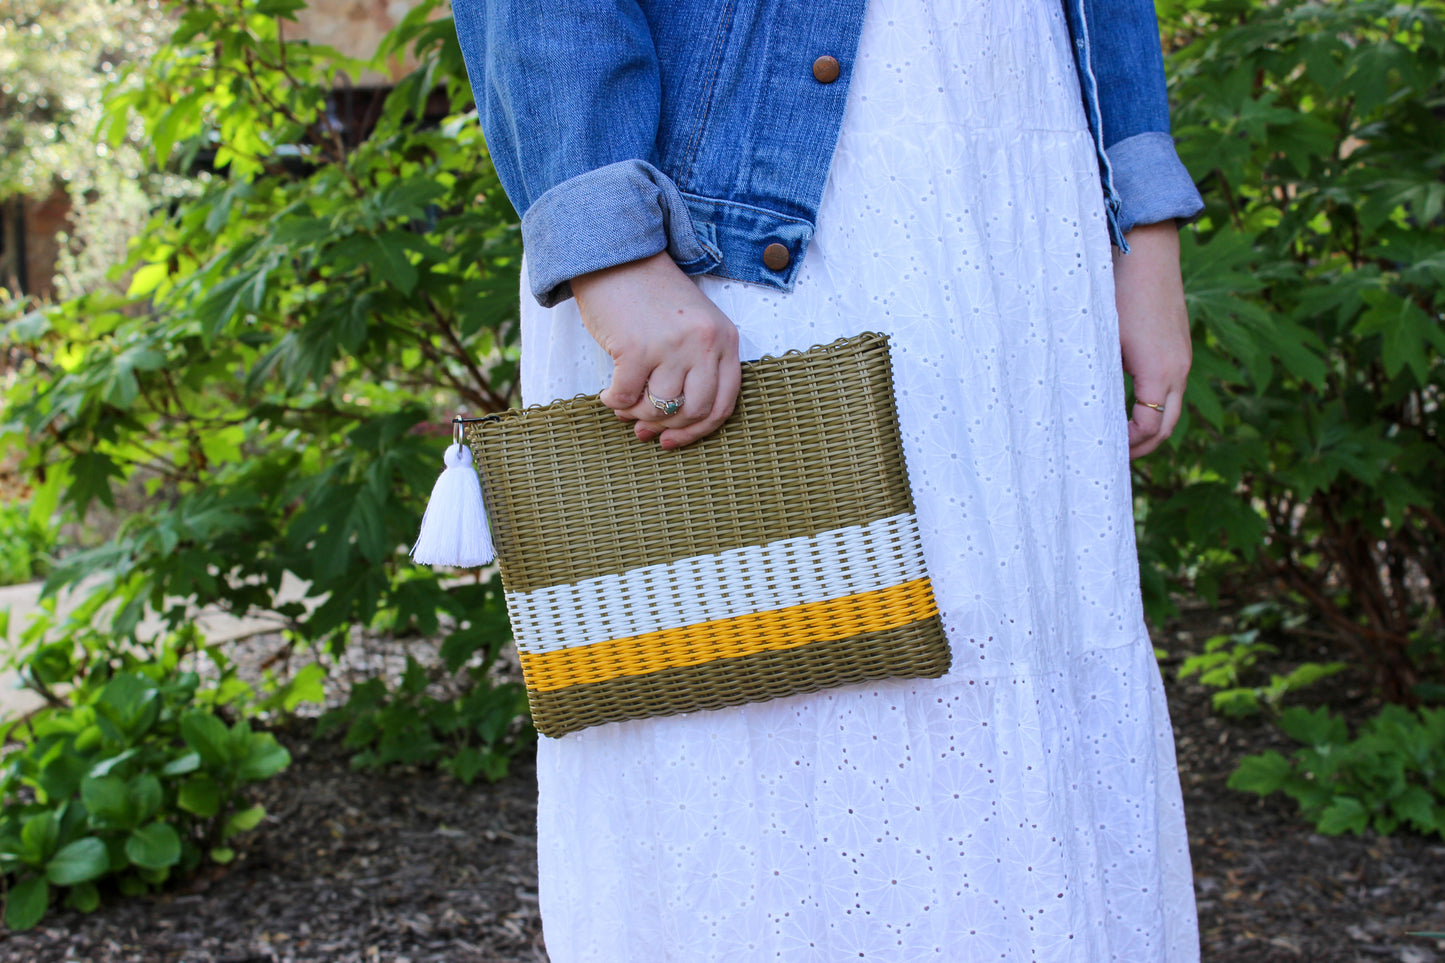 Gold and Yellow Large Clutch